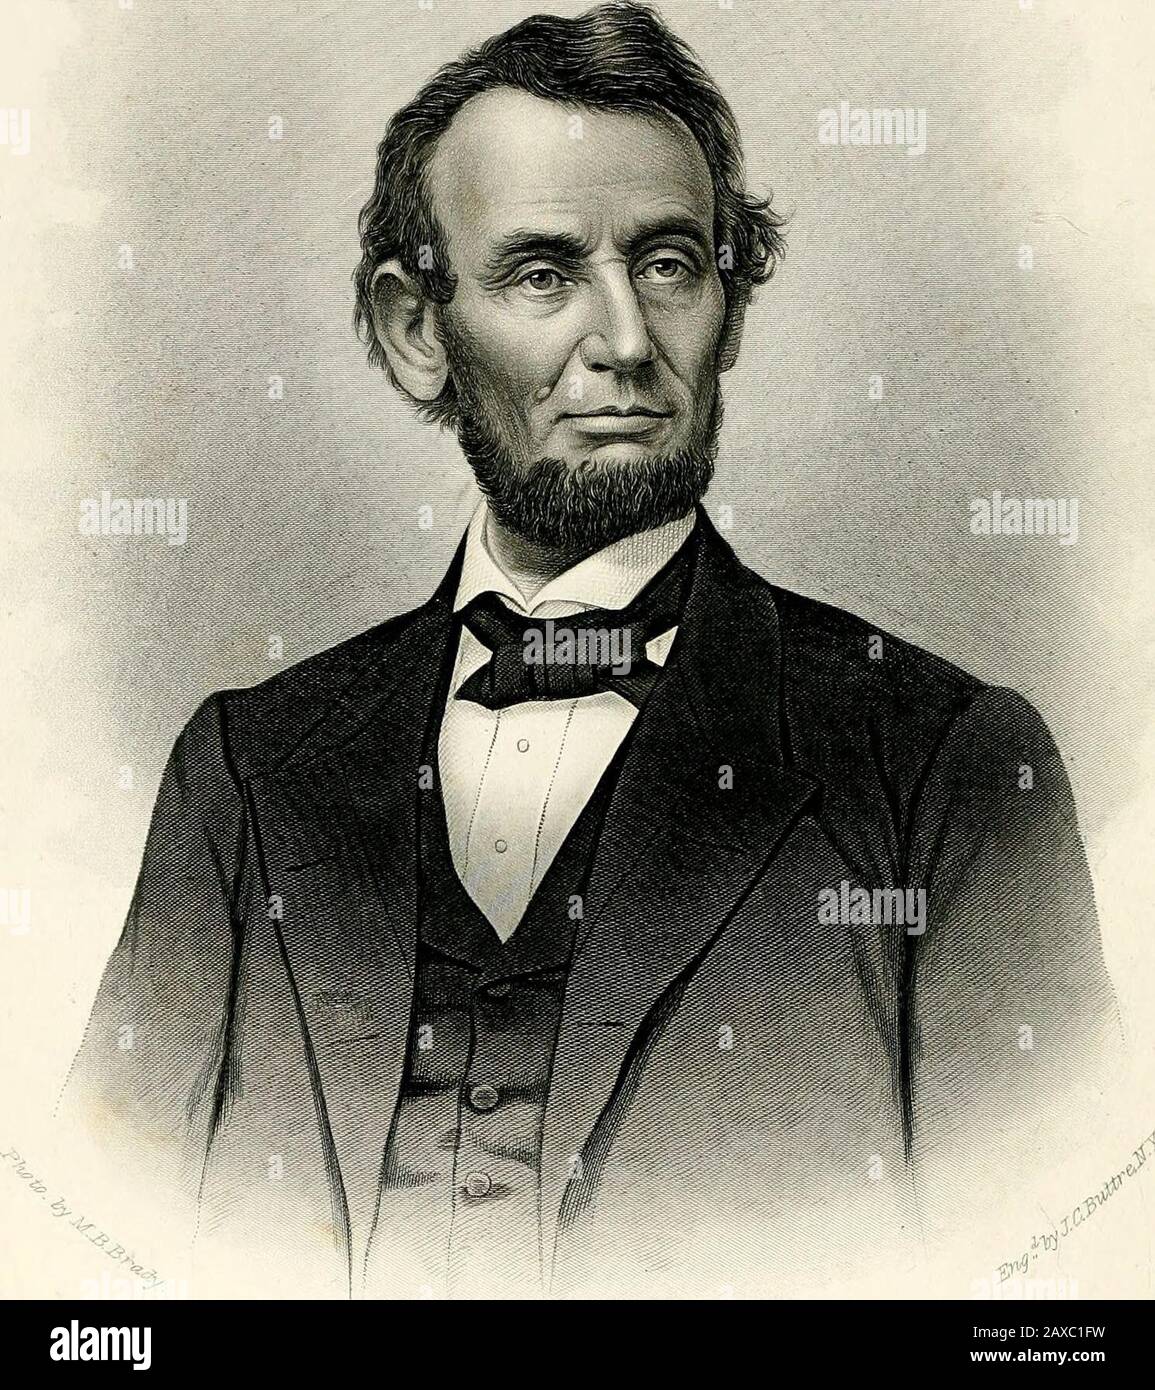 Reminiscences of Abraham Lincoln : by distinguished men of his time . 8, 29, 30, 42.Washington, Journey to, in 1861, 33,223. Arrival at, 1861, 37, Mode of Life in, 469. Watson, P. H., 366.Webster, D., 222, 590.Weed, T., 69.Weldon, L., Biography, 621. Reminiscences, 197.Welling, J. C, Biography, 643. Reminiscences, 519.Western Men, Deputation of, 56.Whitman, W., Biography, 640. Portrait, 469. Reminiscences, 469. Wilkes, Admiral, 245.Williams, A., 15.Wilmot, D., 366.Winston, Mrs., 502, 508.Wounds Received by Lincoln, 462.Wrestler, 219. Yates, R. W., 600. /. XOO^ Oi&gt;^. O^^B i /? ^ tllreminisc Stock Photo